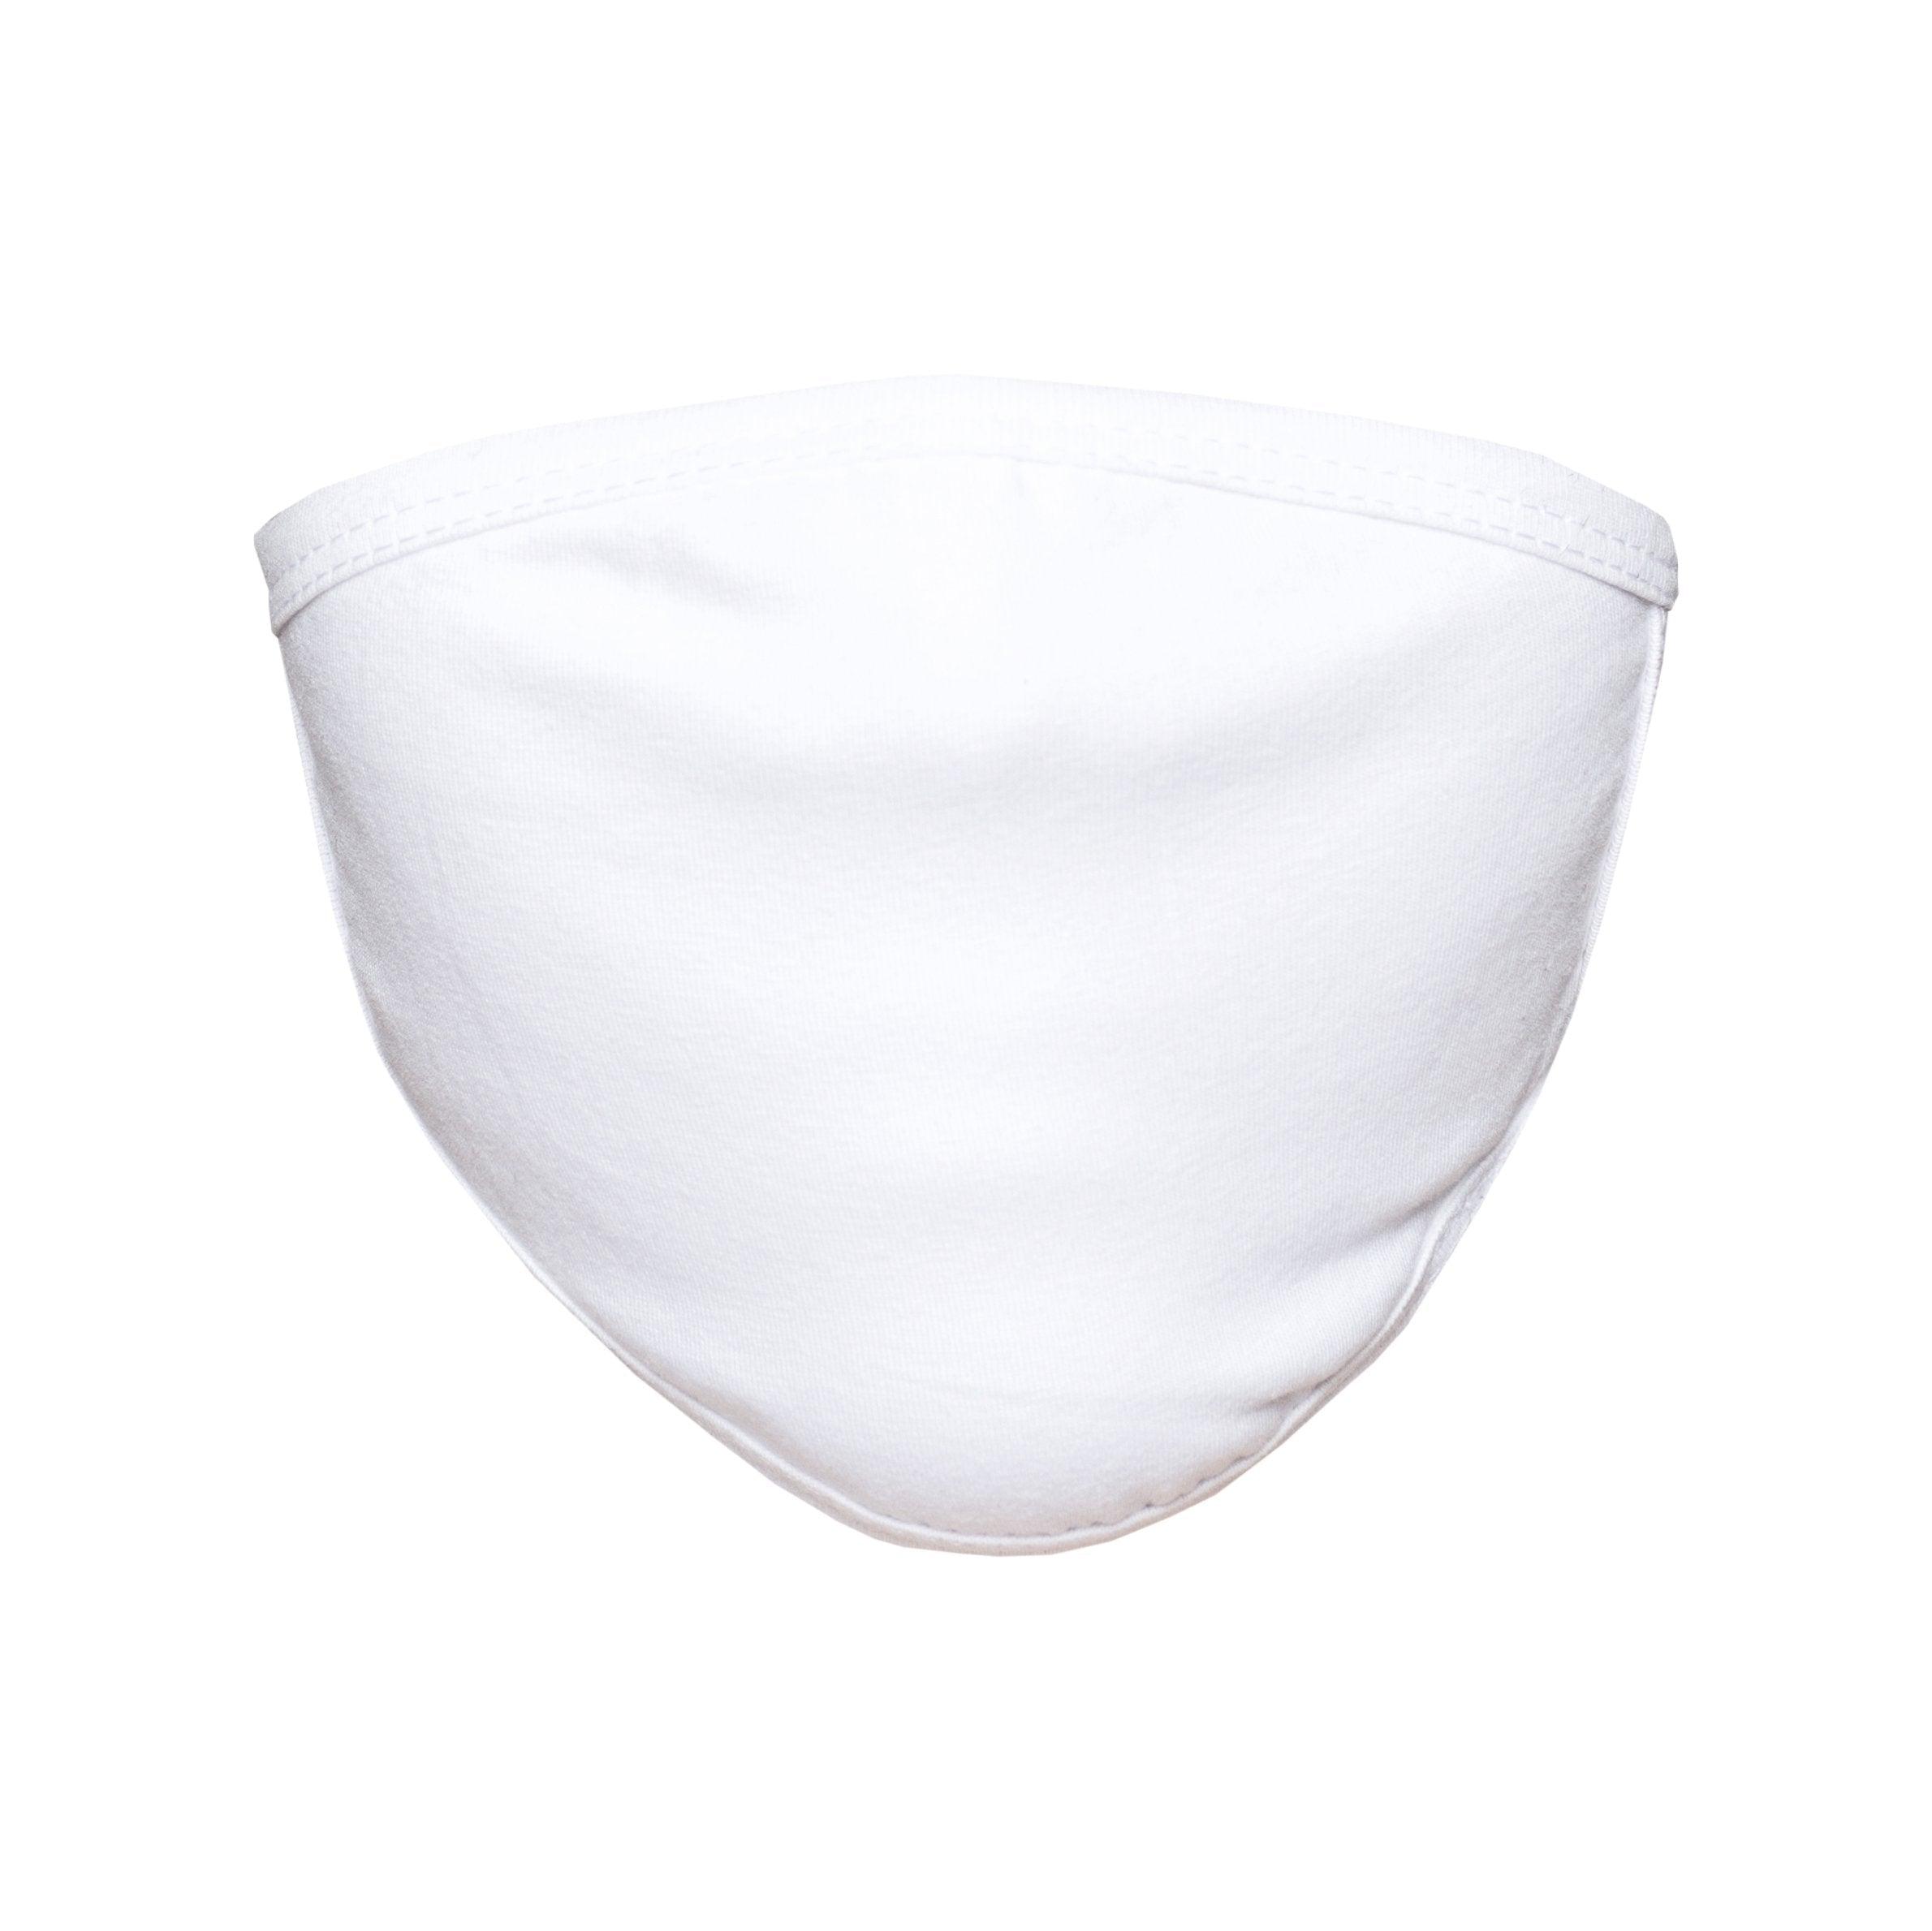 Urban Mask White - Pack of 5 (FINAL SALE CLOSEOUT) - Tag&Crew